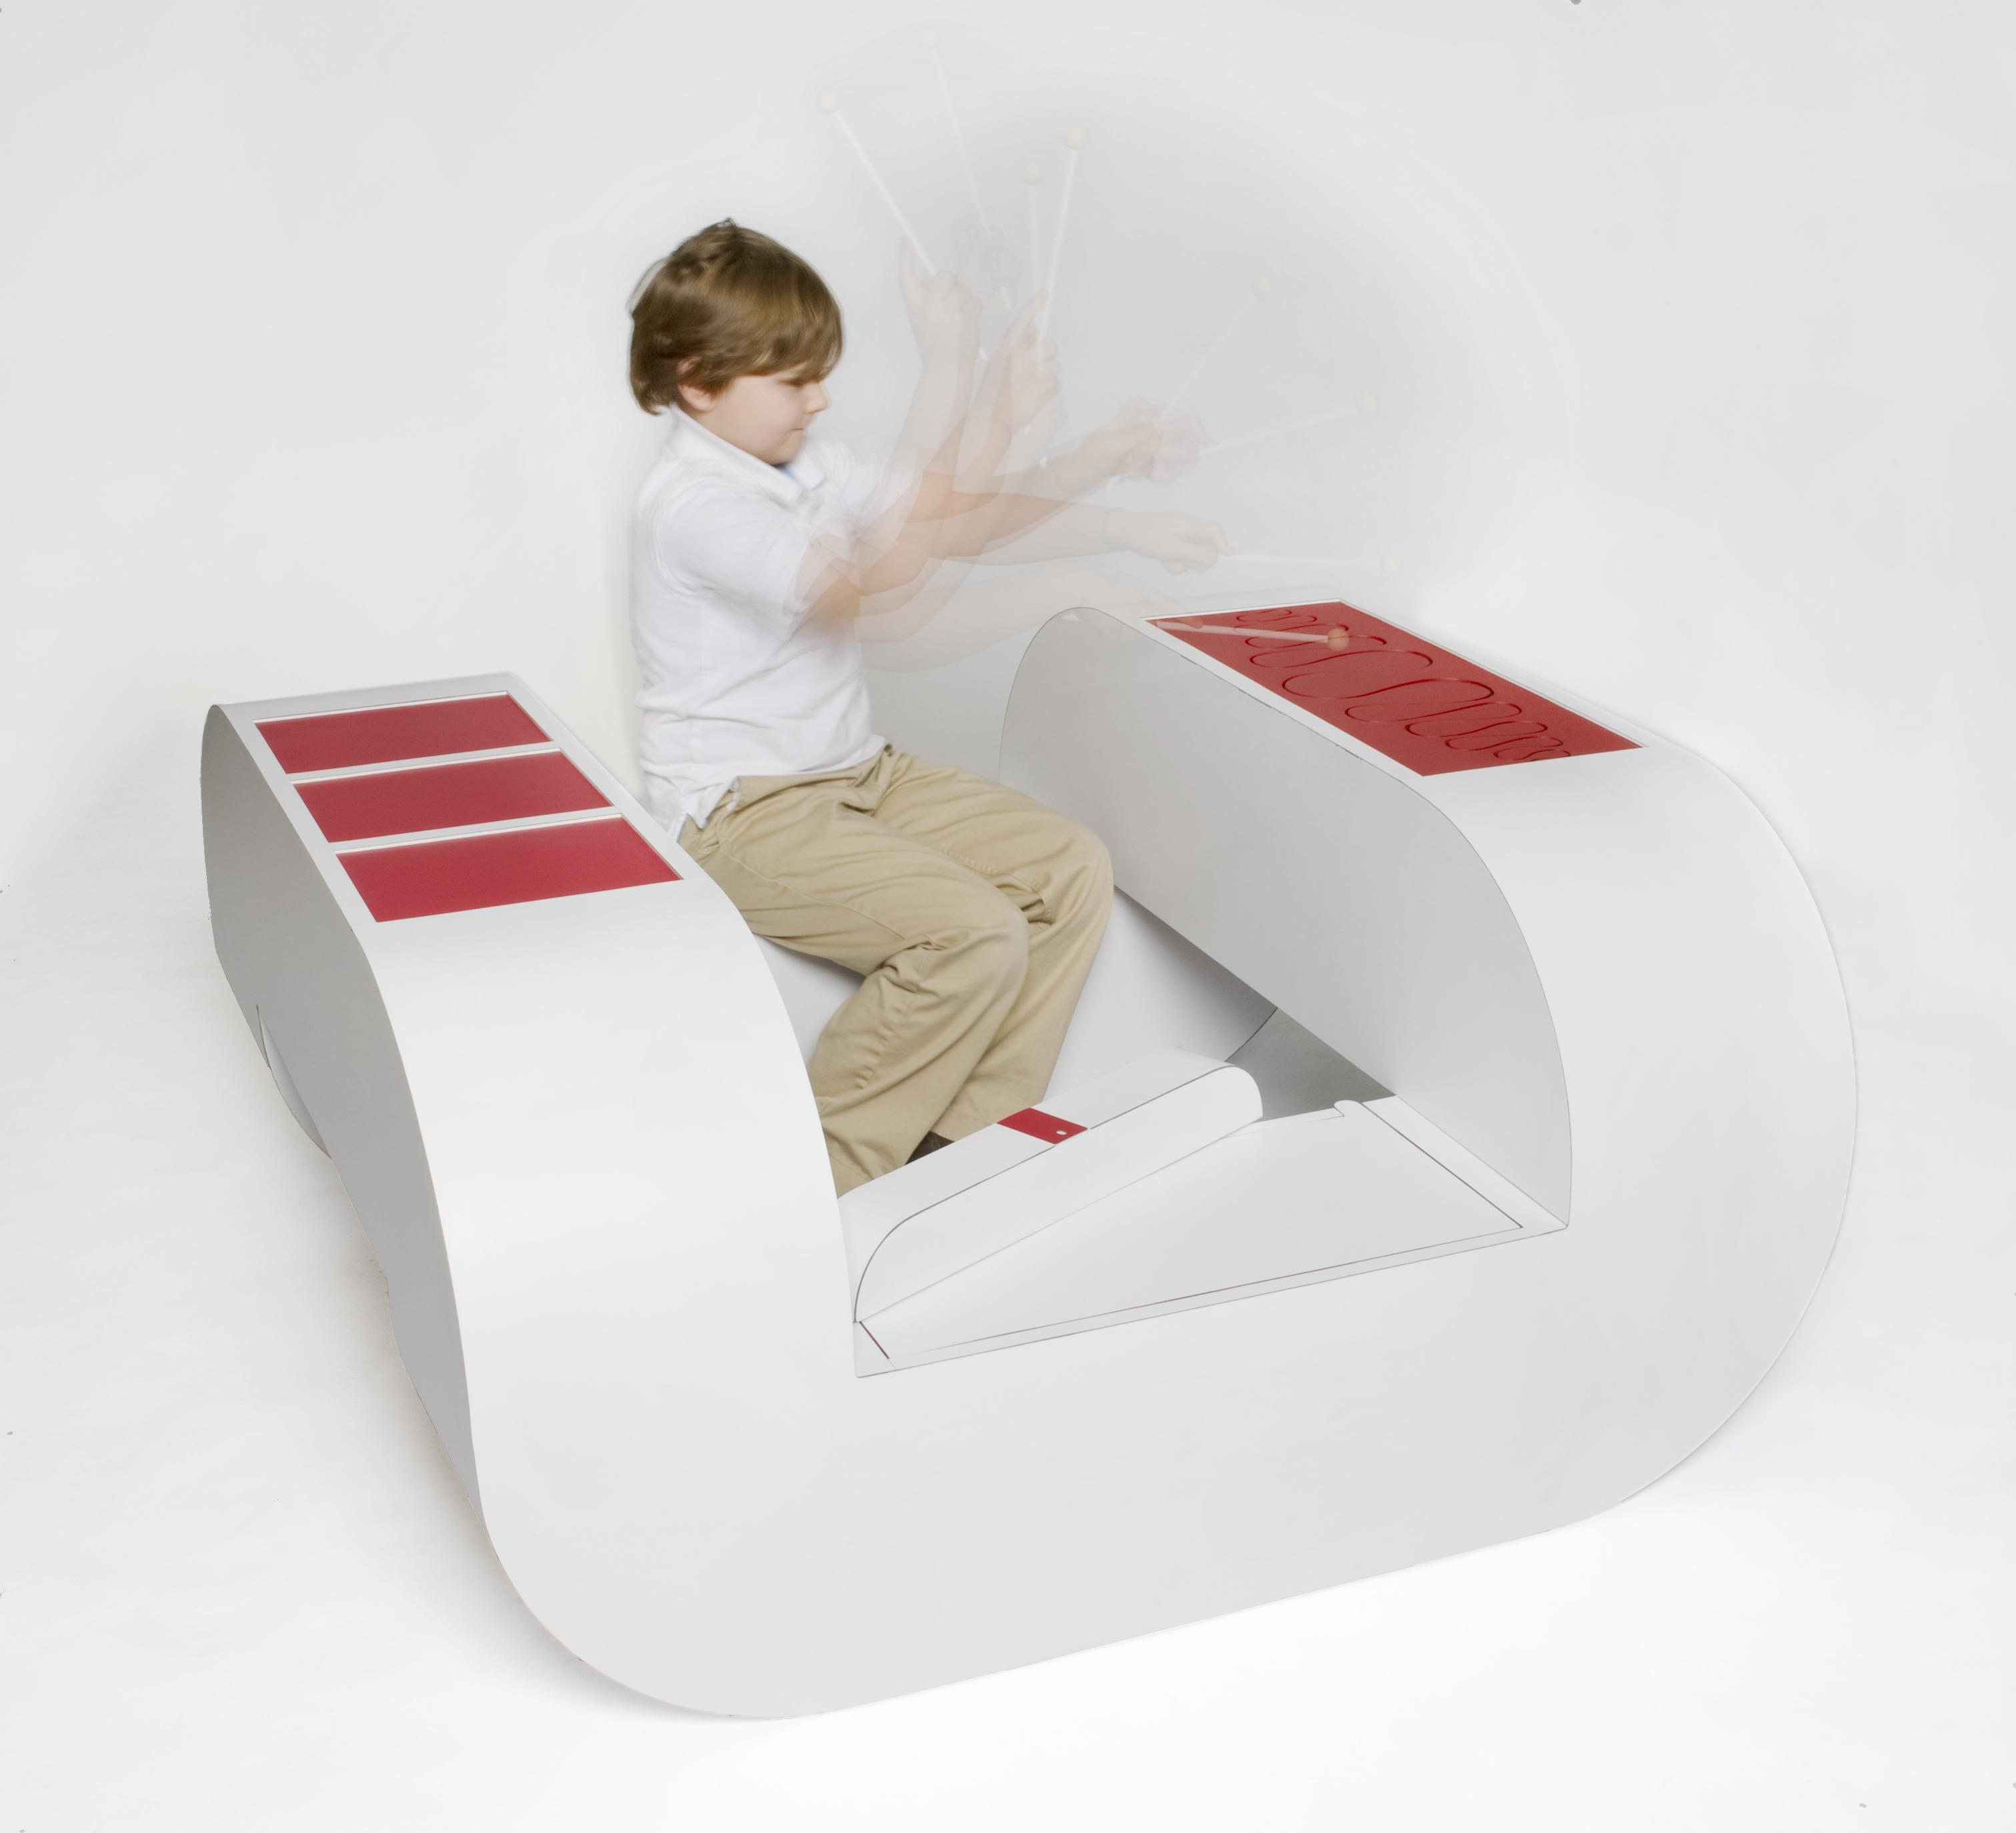 A play bench design being used by a child.